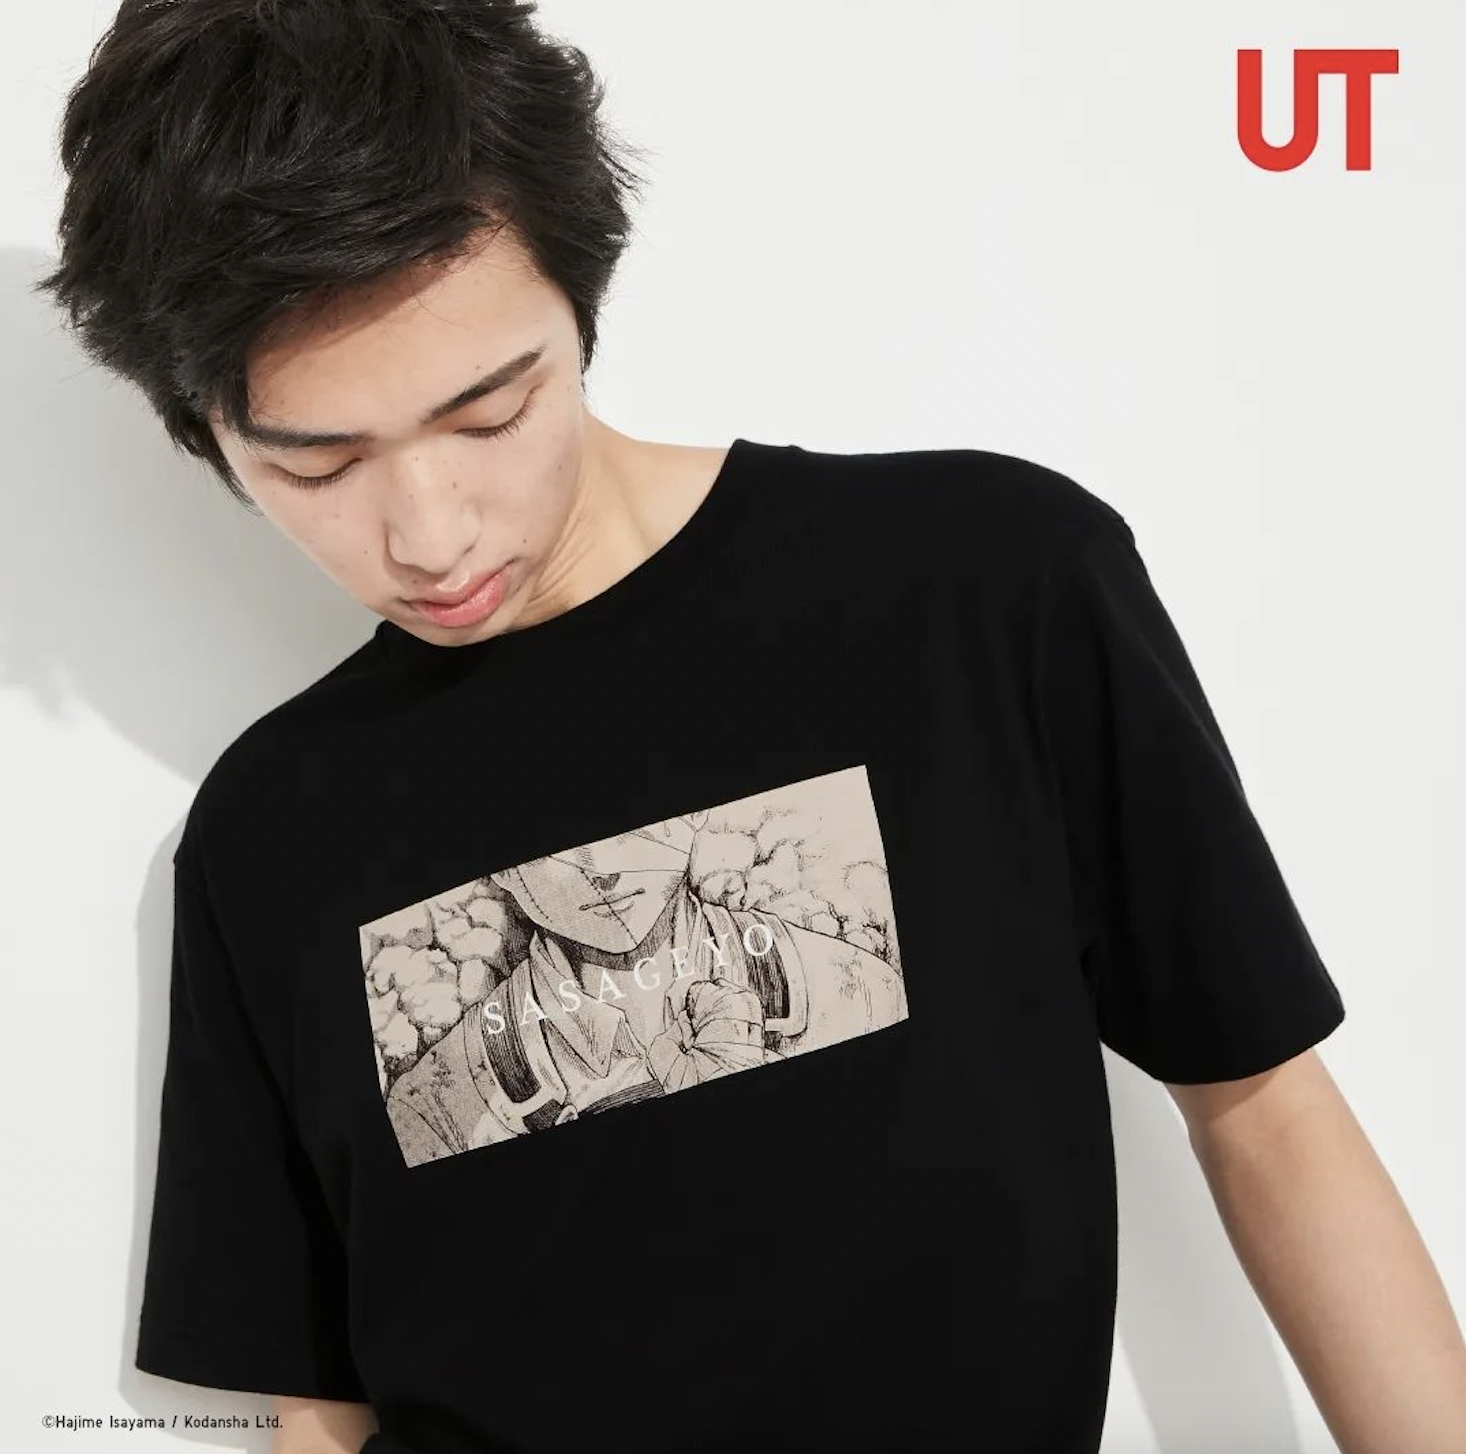 UNIQLO Launches All-New UT Collection 2023 For Attack On Titan Fans ...